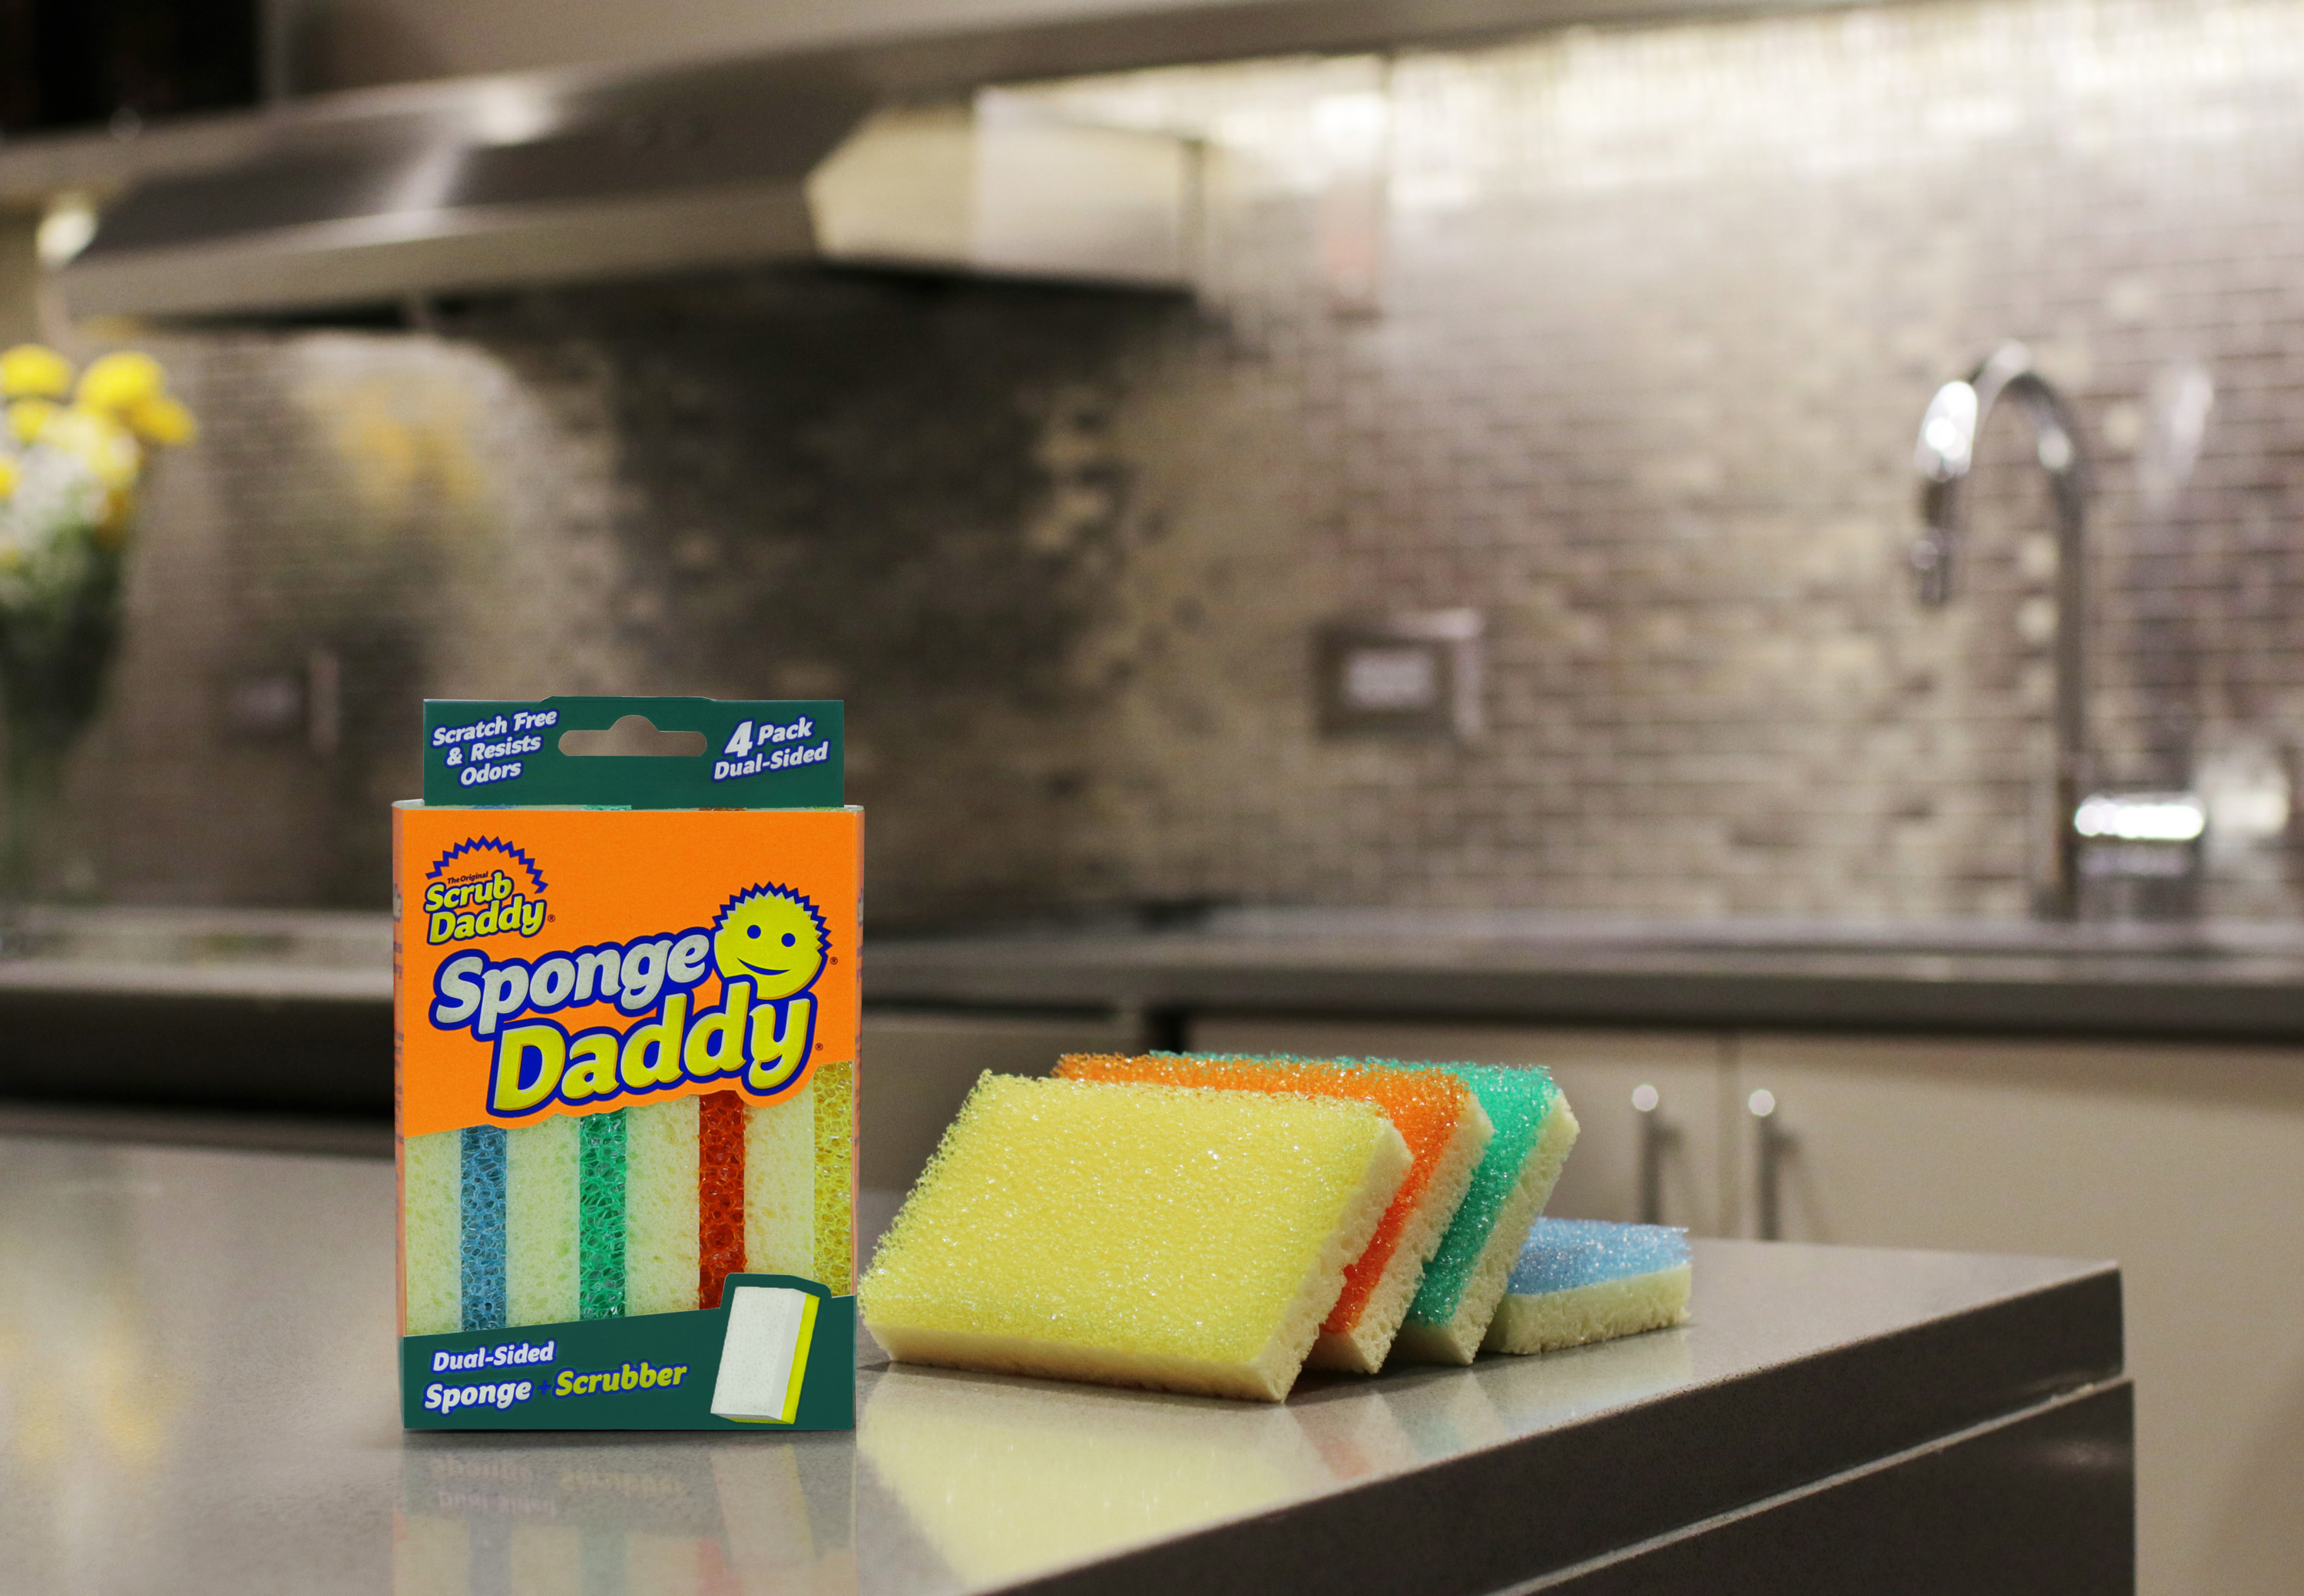 A 4-pack of dual-sided Sponge Daddy scrubbers